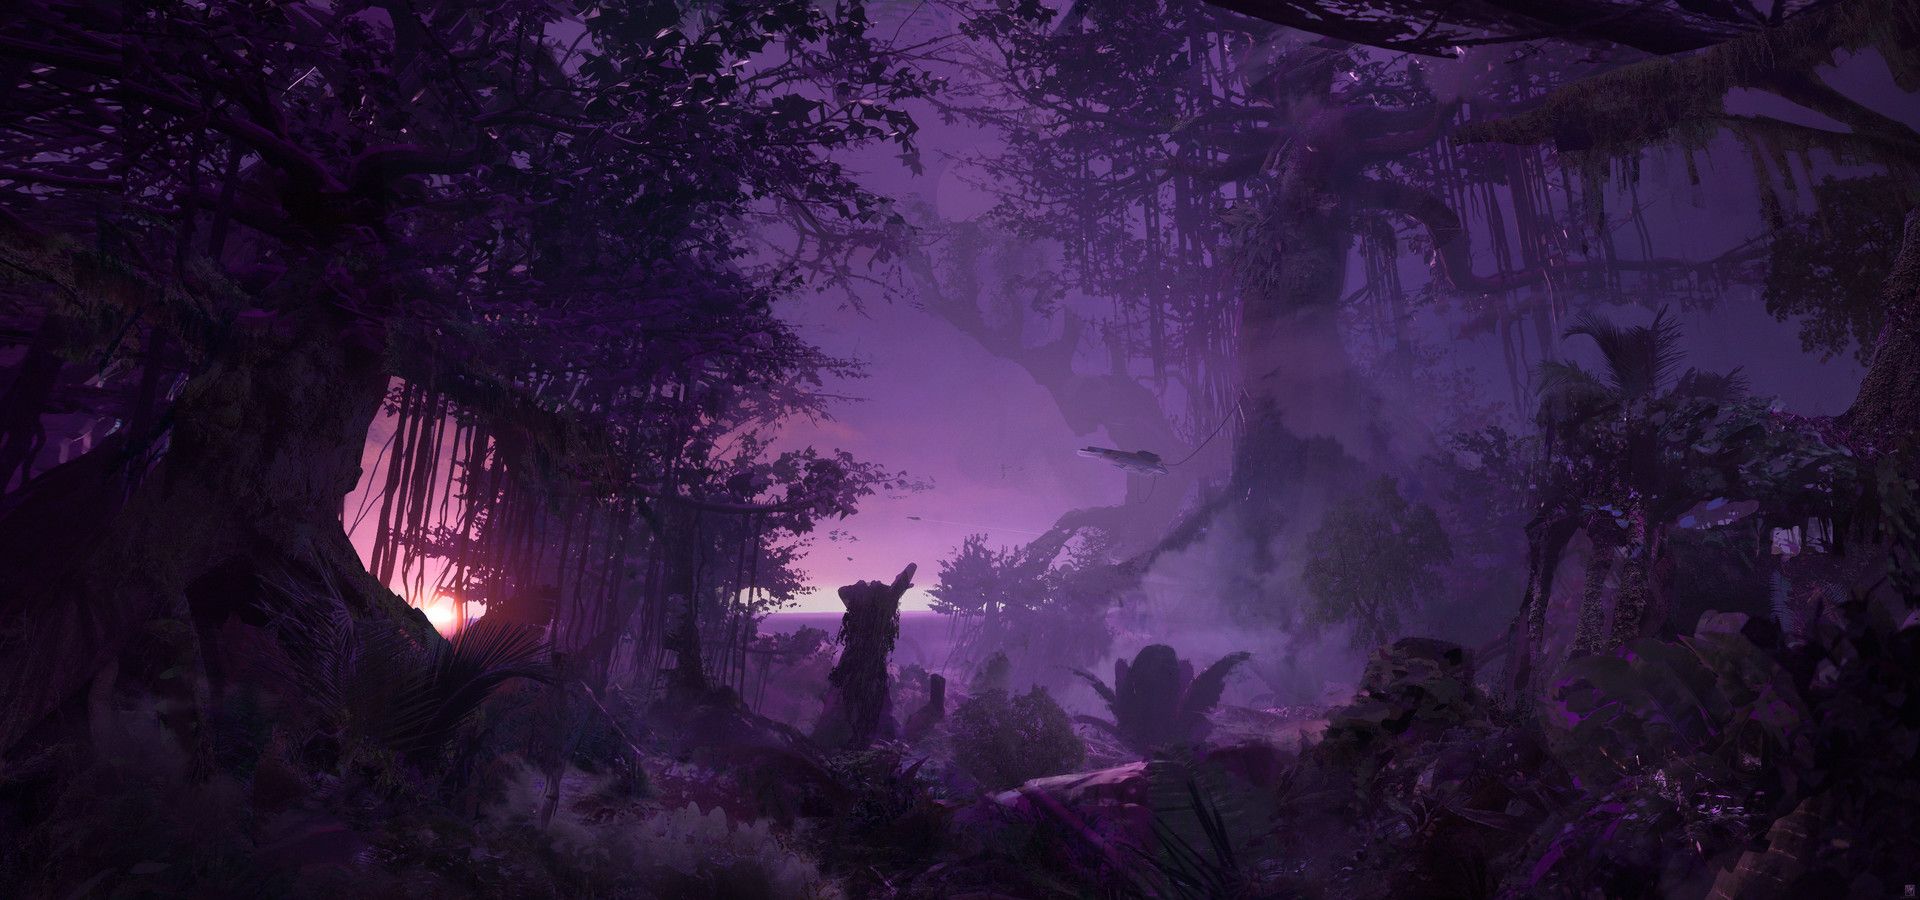 A forest at night with a purple hue - Jungle